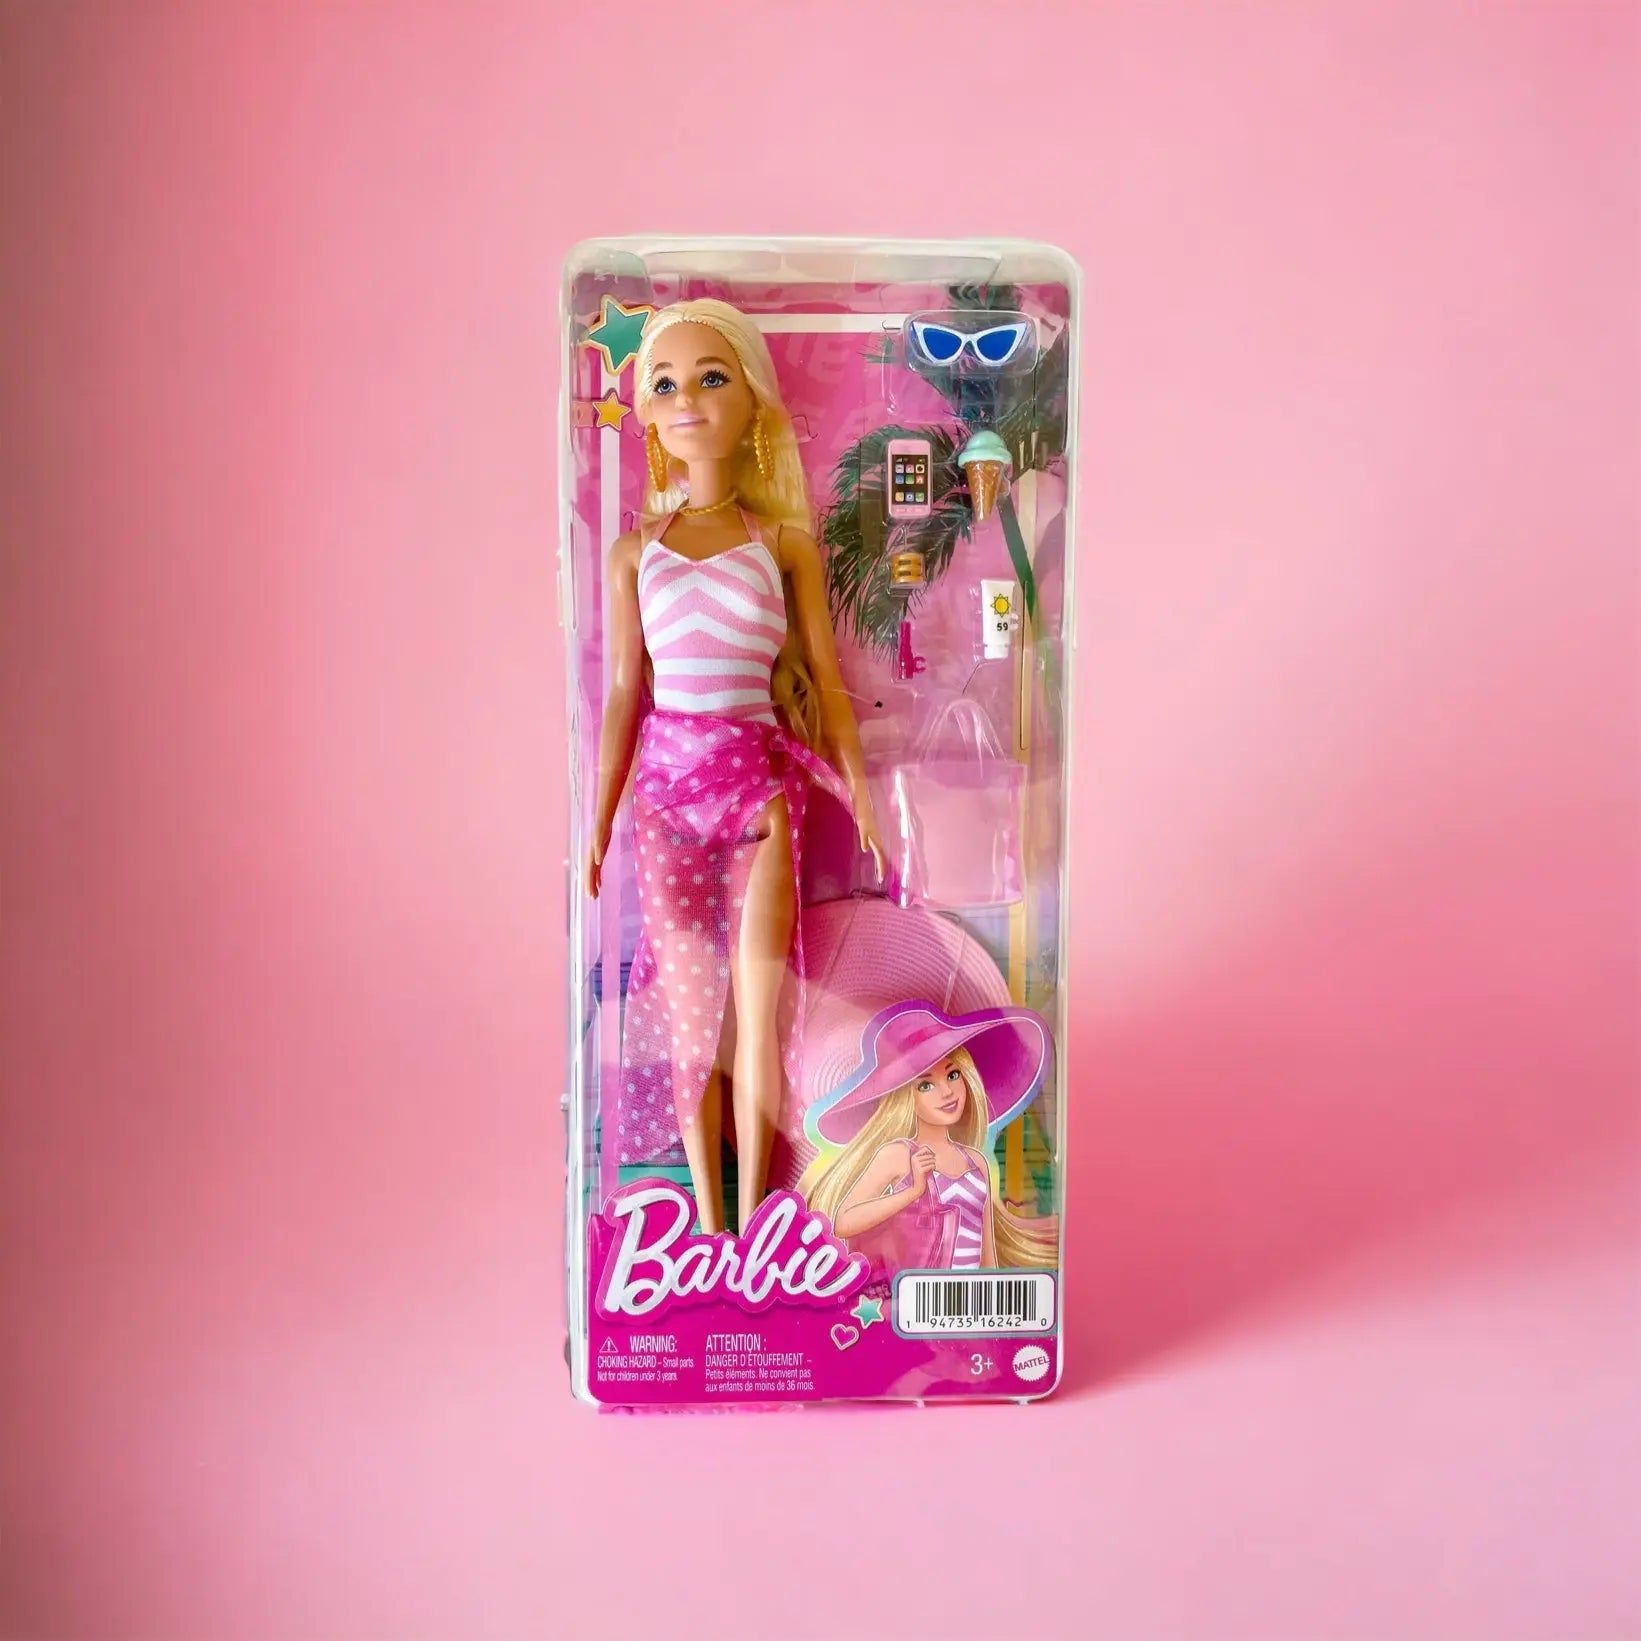 Barbie James N Glambarbie Fashionista Blonde Doll - Educational Toy For  Girls, Movie-themed Gift